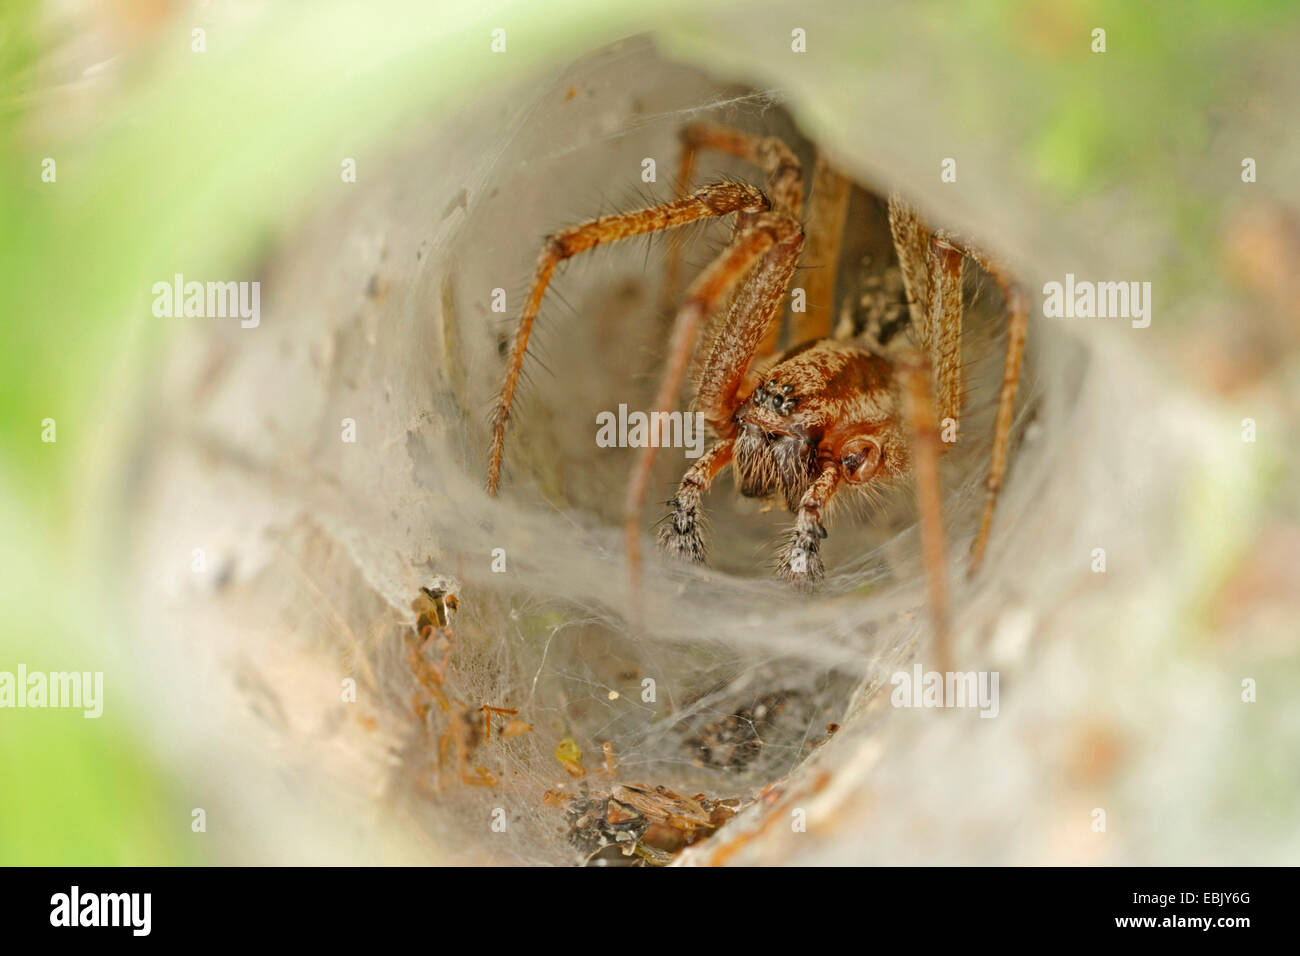 funnel-web spider in its web, Germany Stock Photo